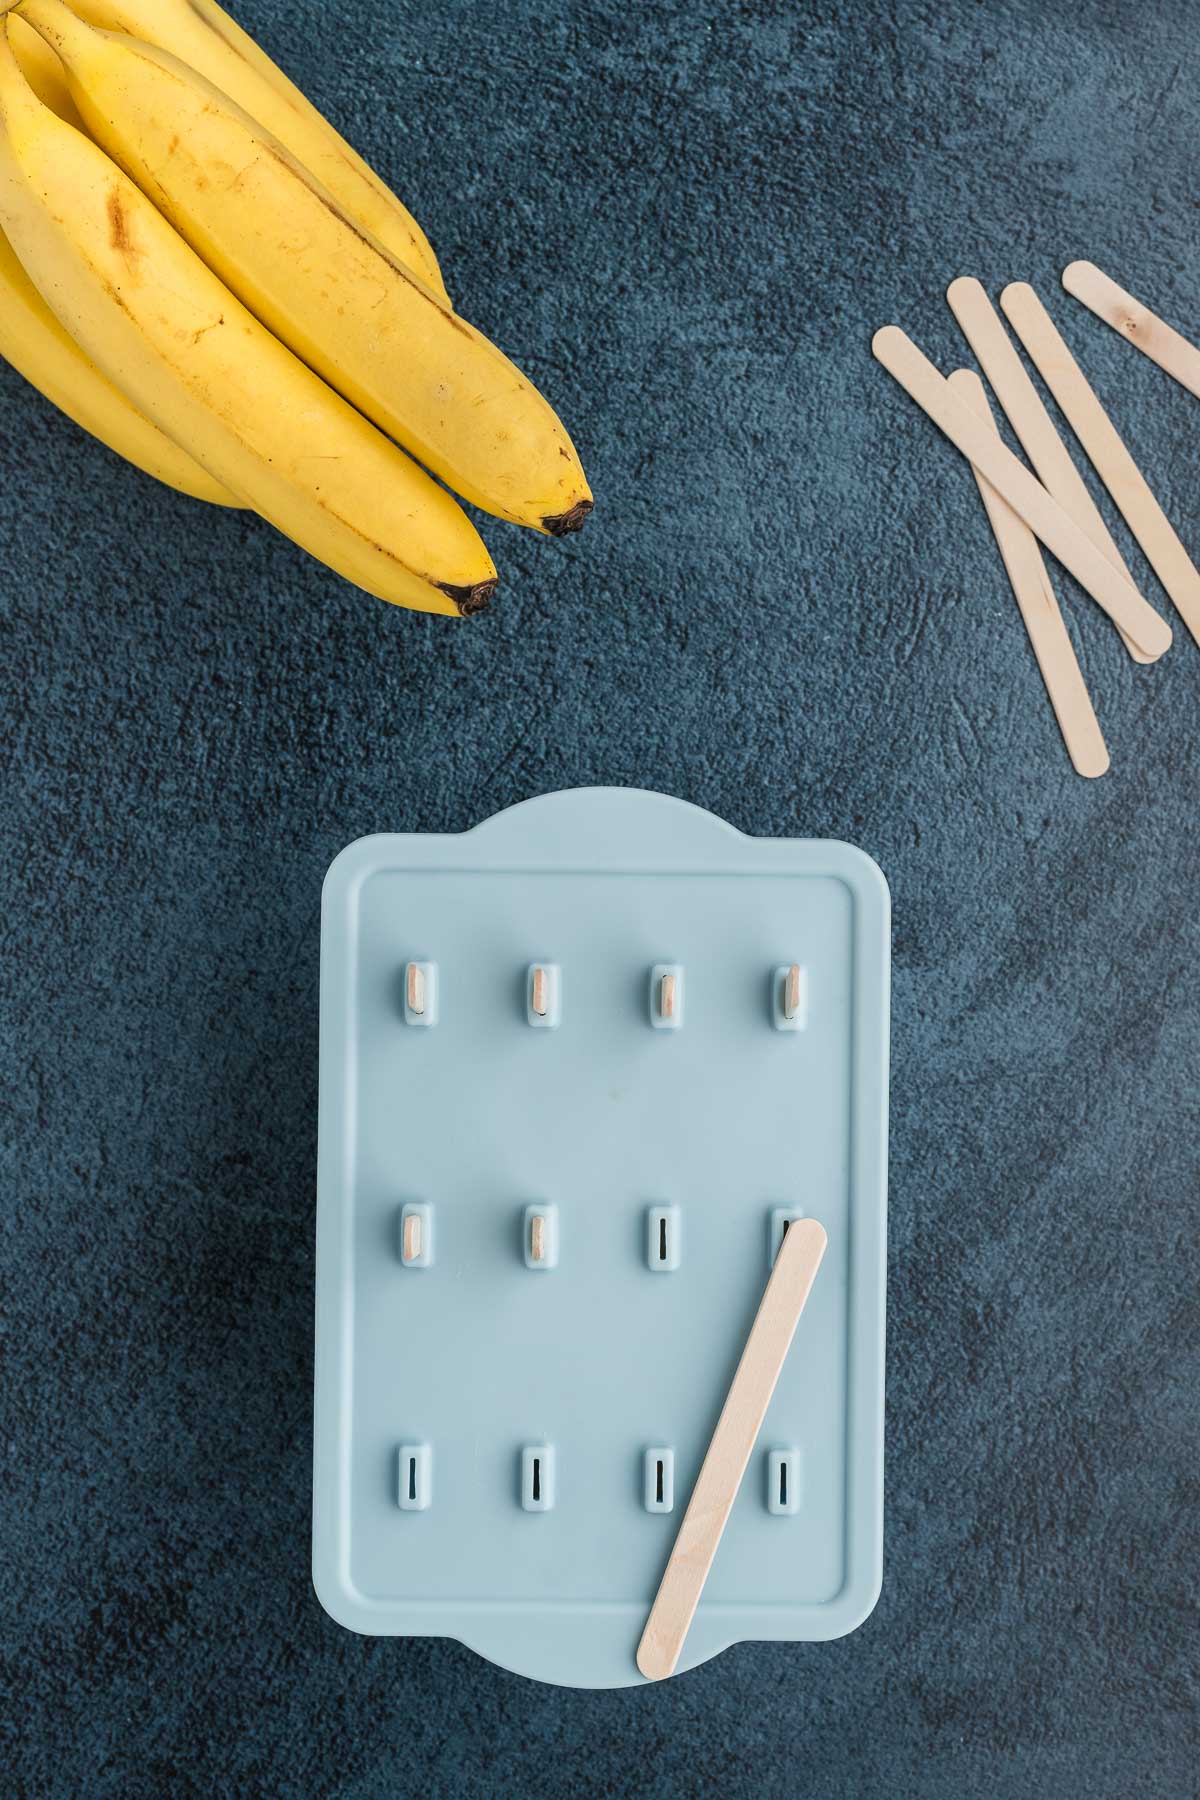 banana popsicle molds with popsicle sticks